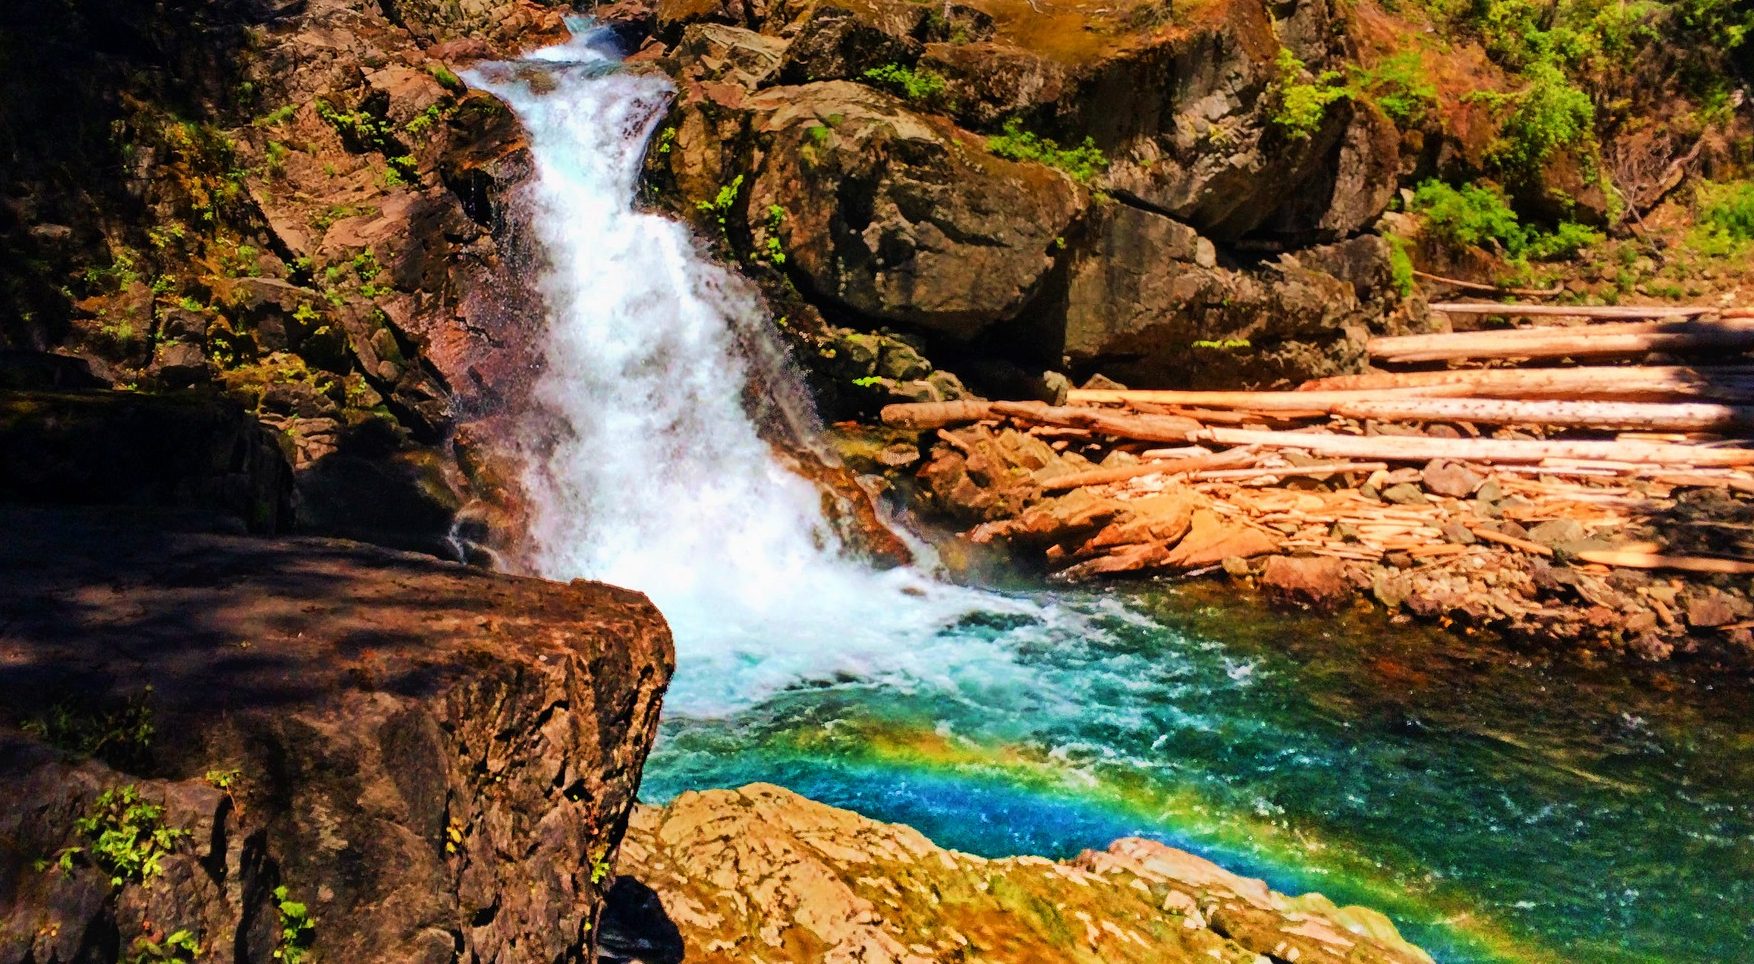 Clear-water-and-colorful-rocks-and-rainbow-at-Silver-Falls-Mt-Rainier-National-Park-1-e1470514323735.jpg